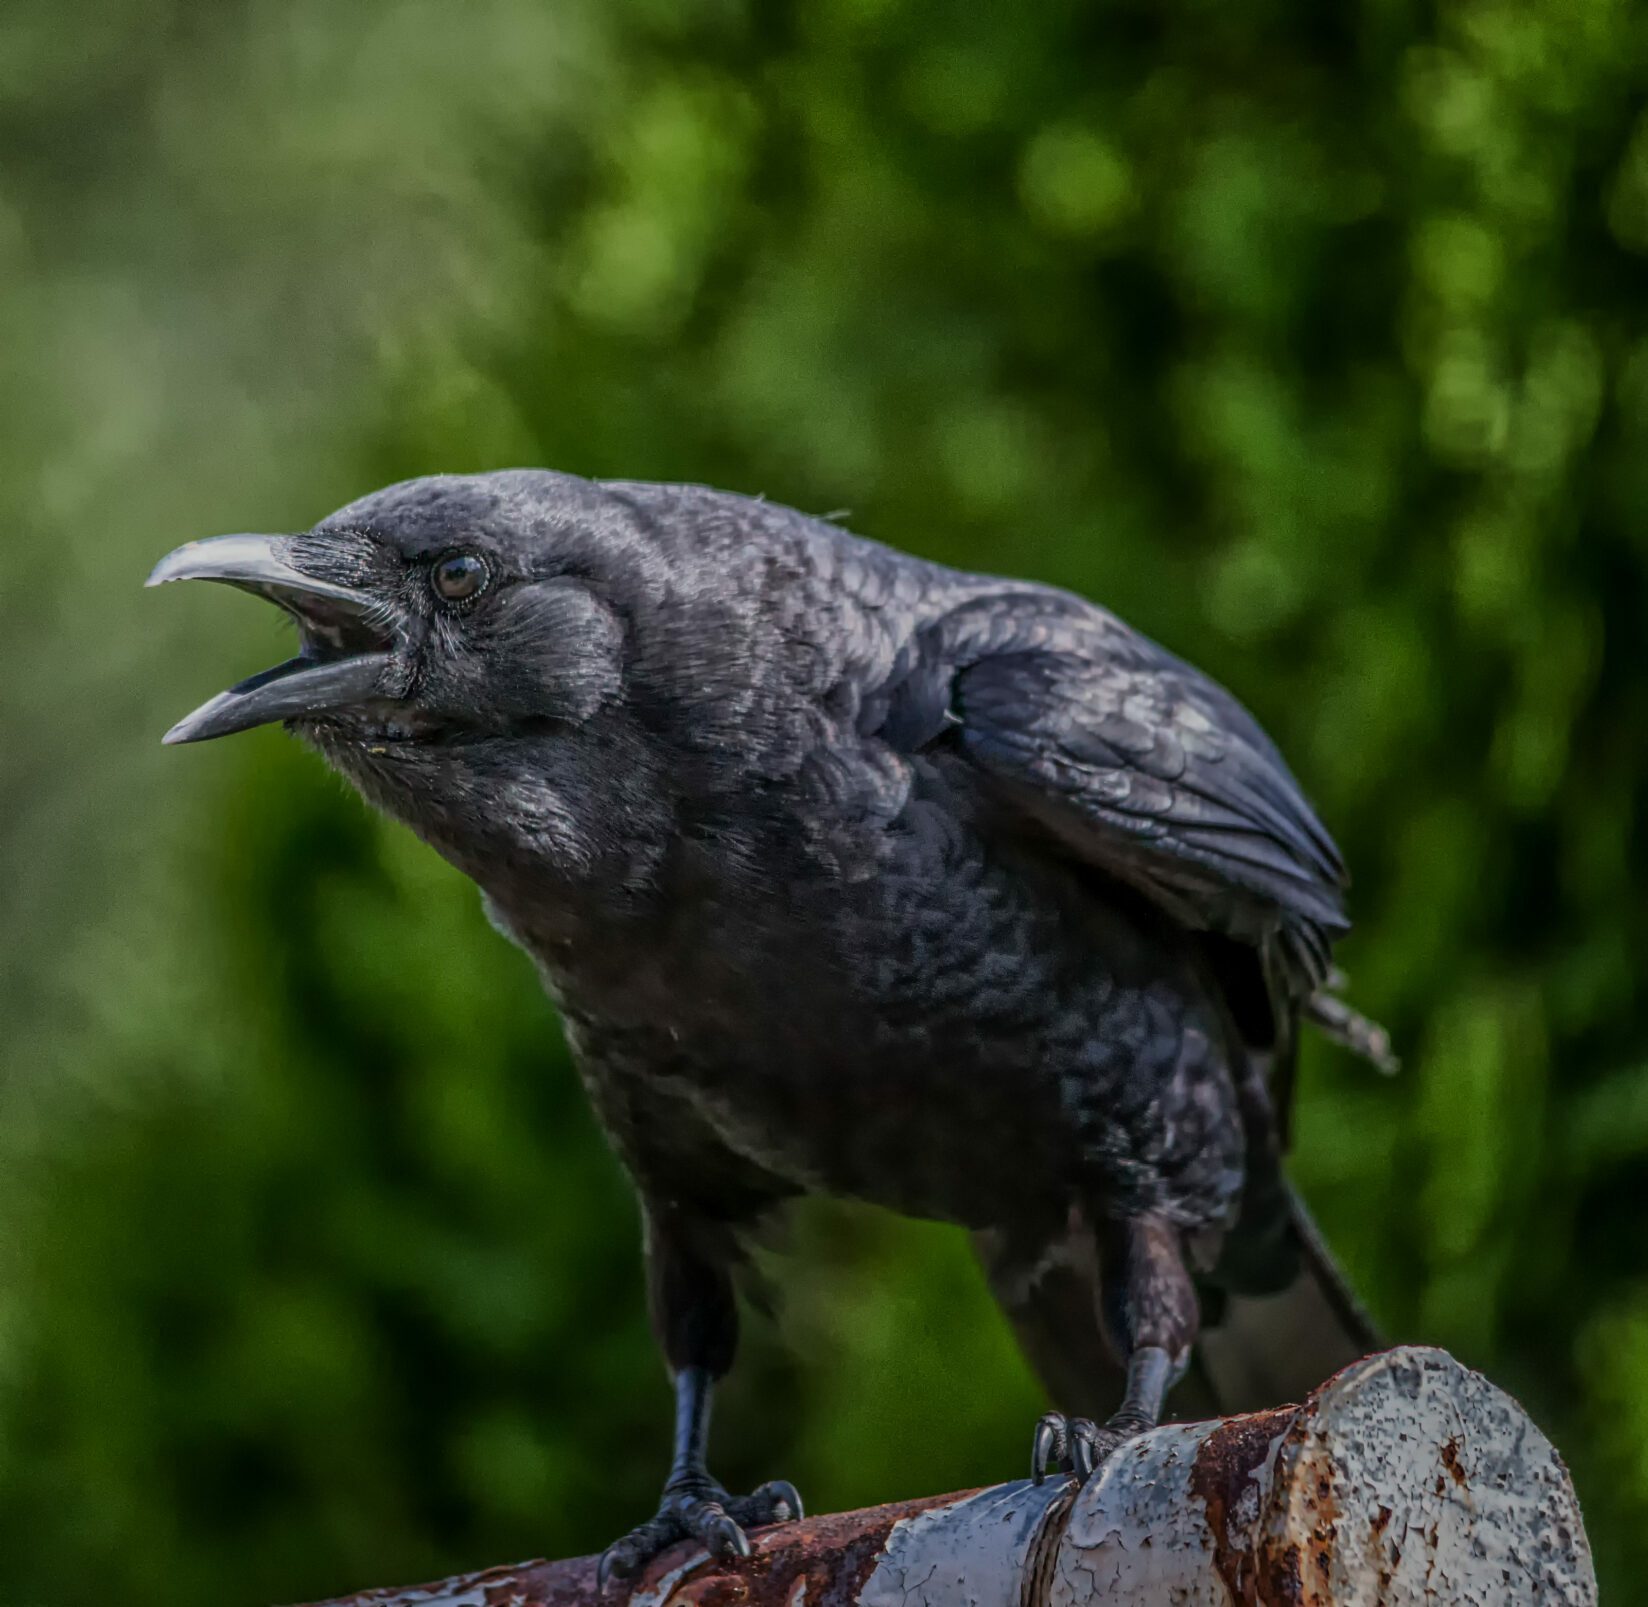 Crow on a pipe cawing at nearby fledgling